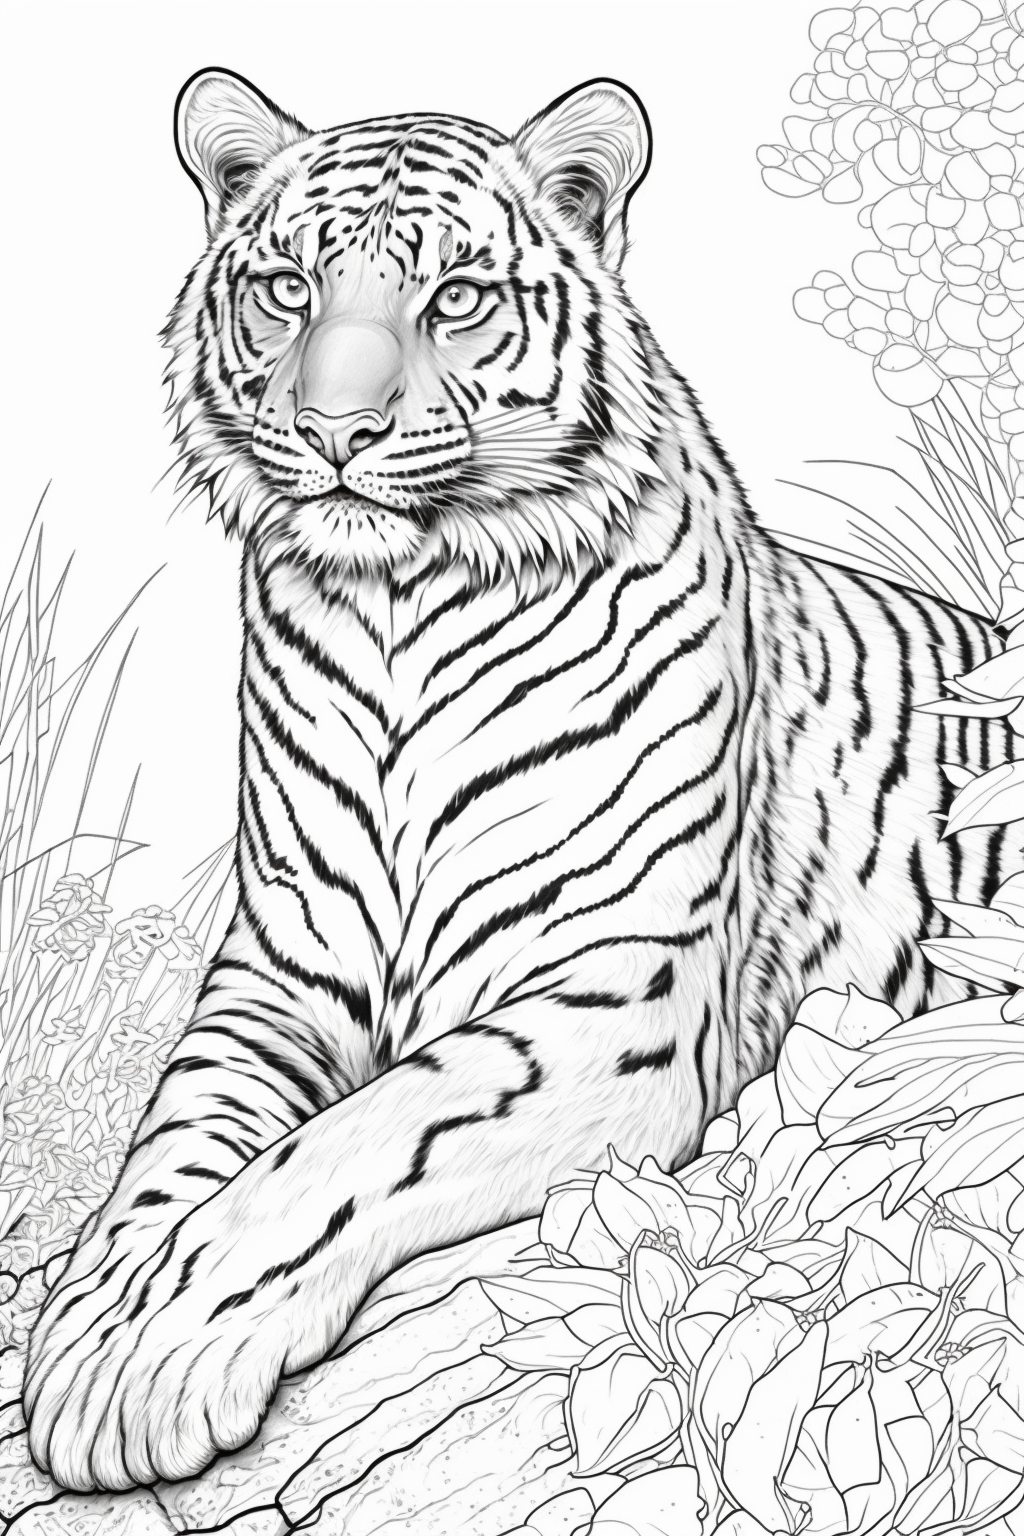 Big tiger coloring page â lulu pages